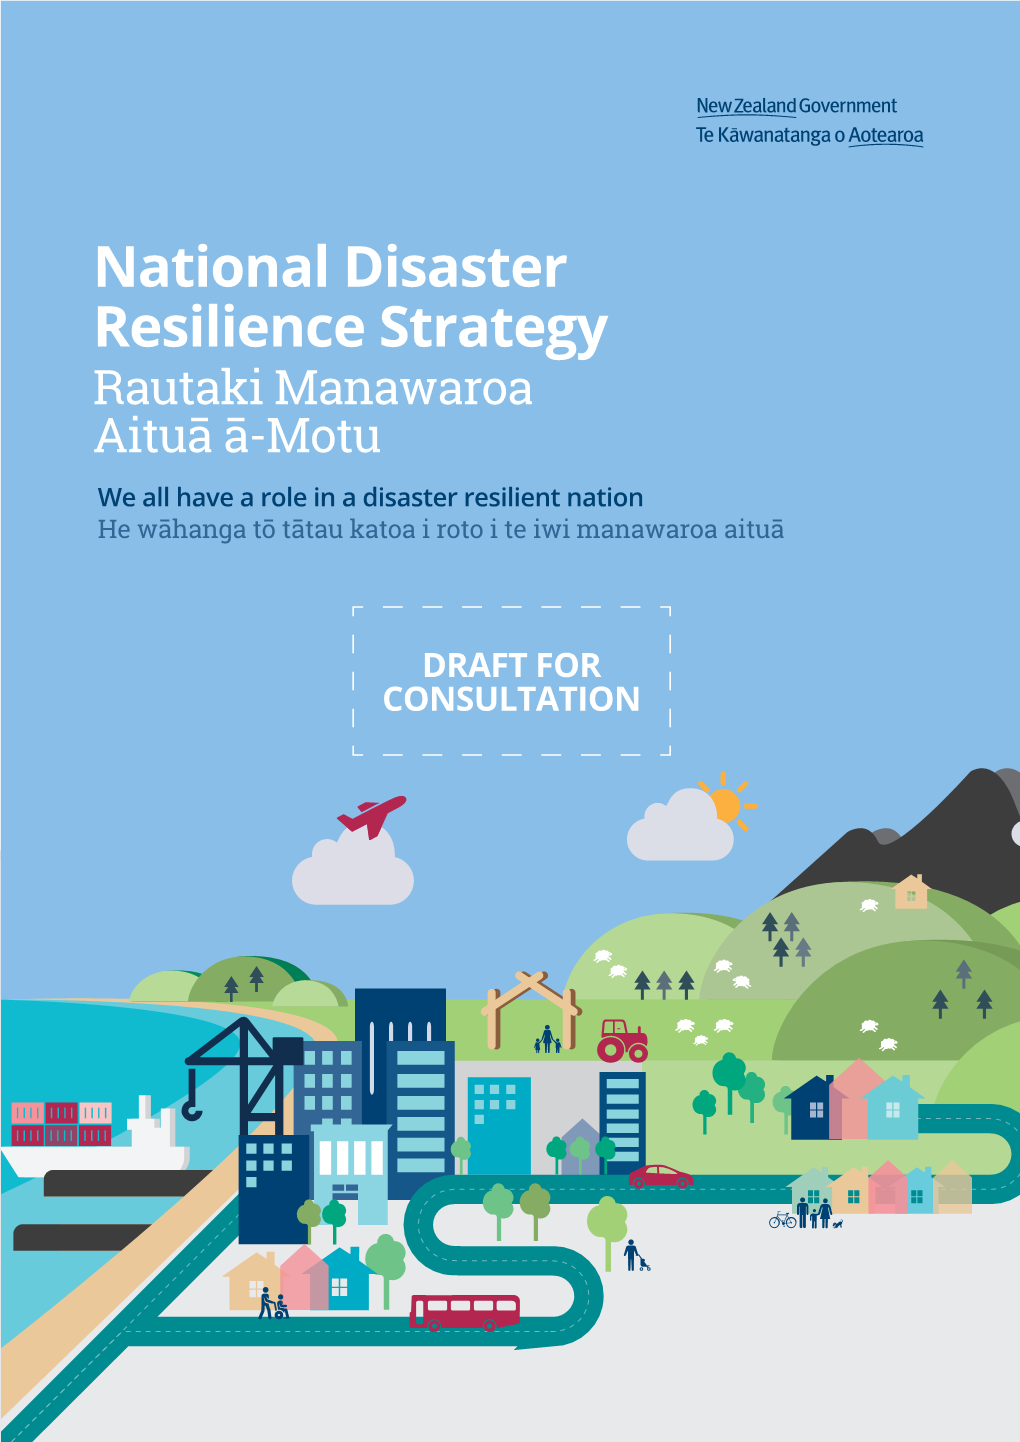 Proposed National Disaster Resilience Strategy